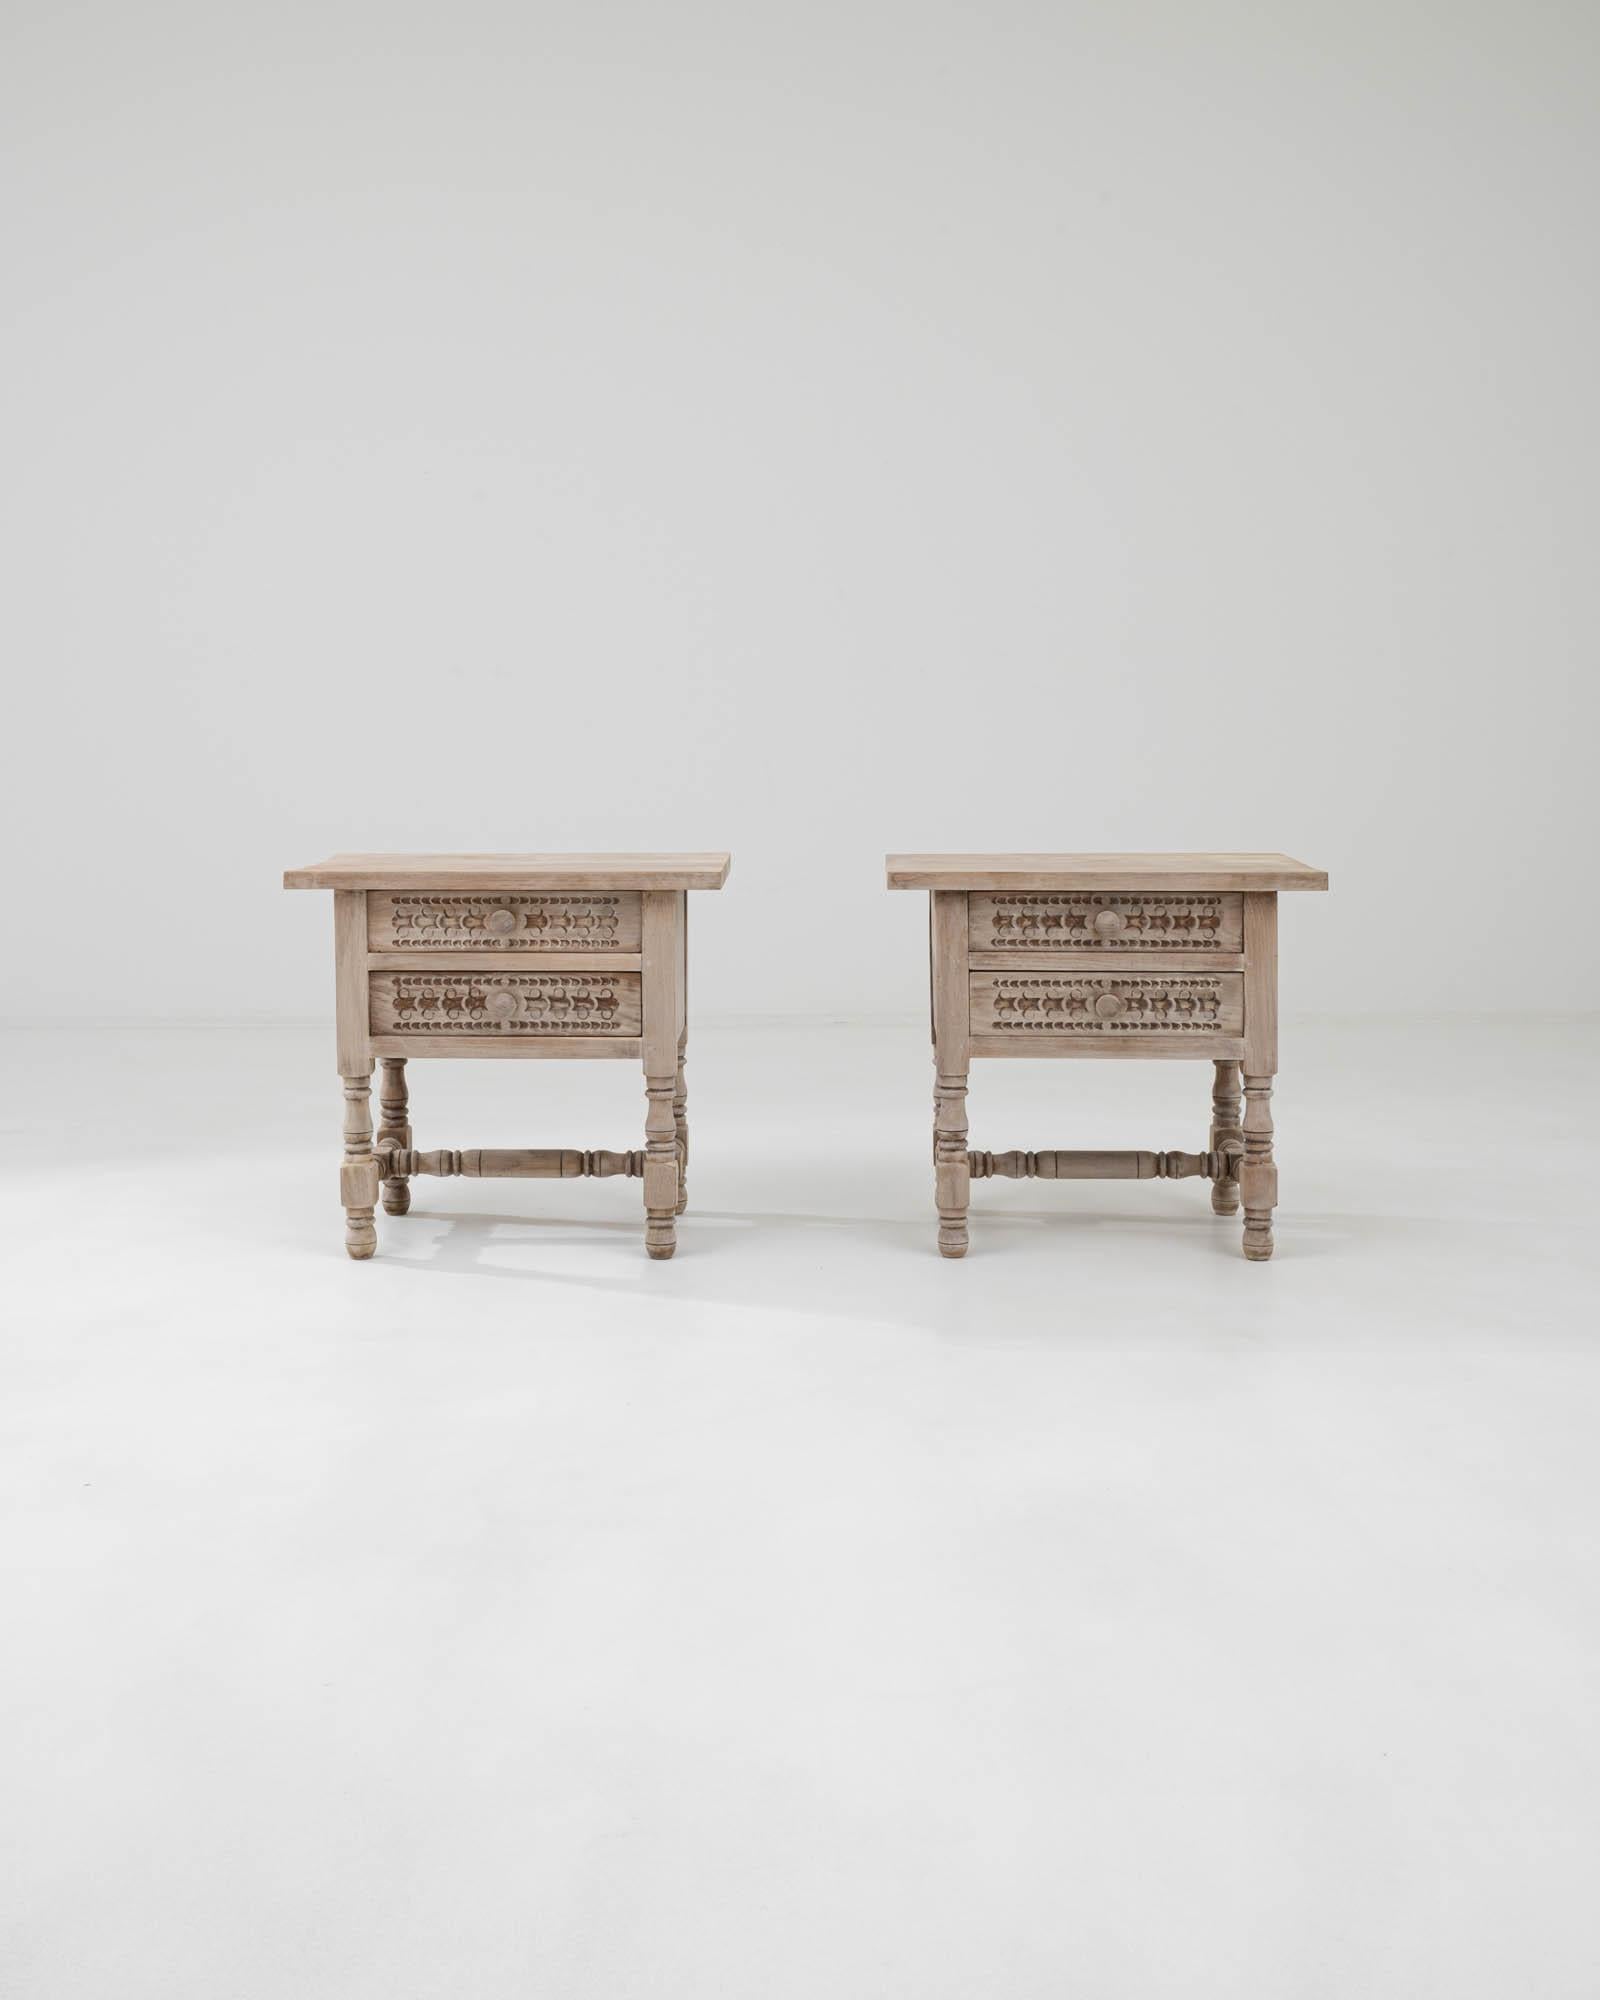 A pair of bedside tables created in 20th Century France. Full of playful character, this pair of bedtime tables radiates a soothing sense of optimistic charm. With drawer faces artfully sculpted and carved into geometric patterns and legs and